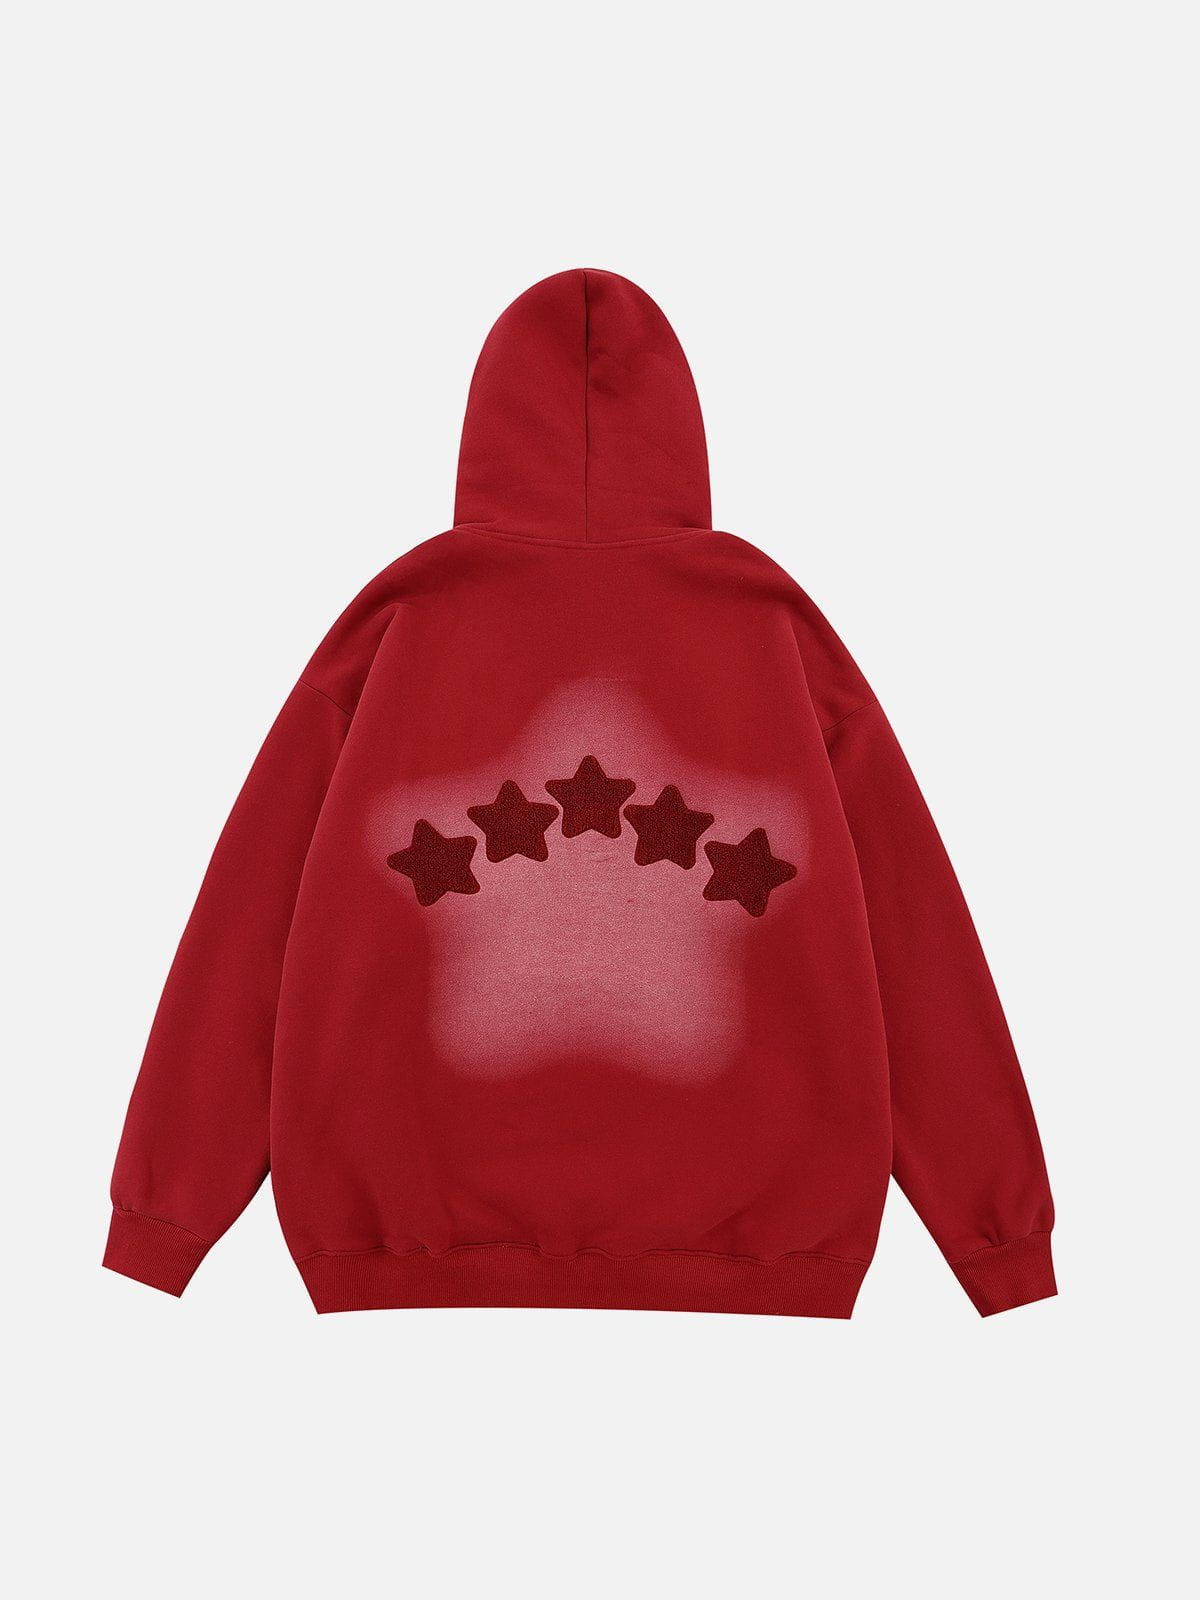 Majesda® - Flocked Star Embroidery Hoodie outfit ideas streetwear fashion